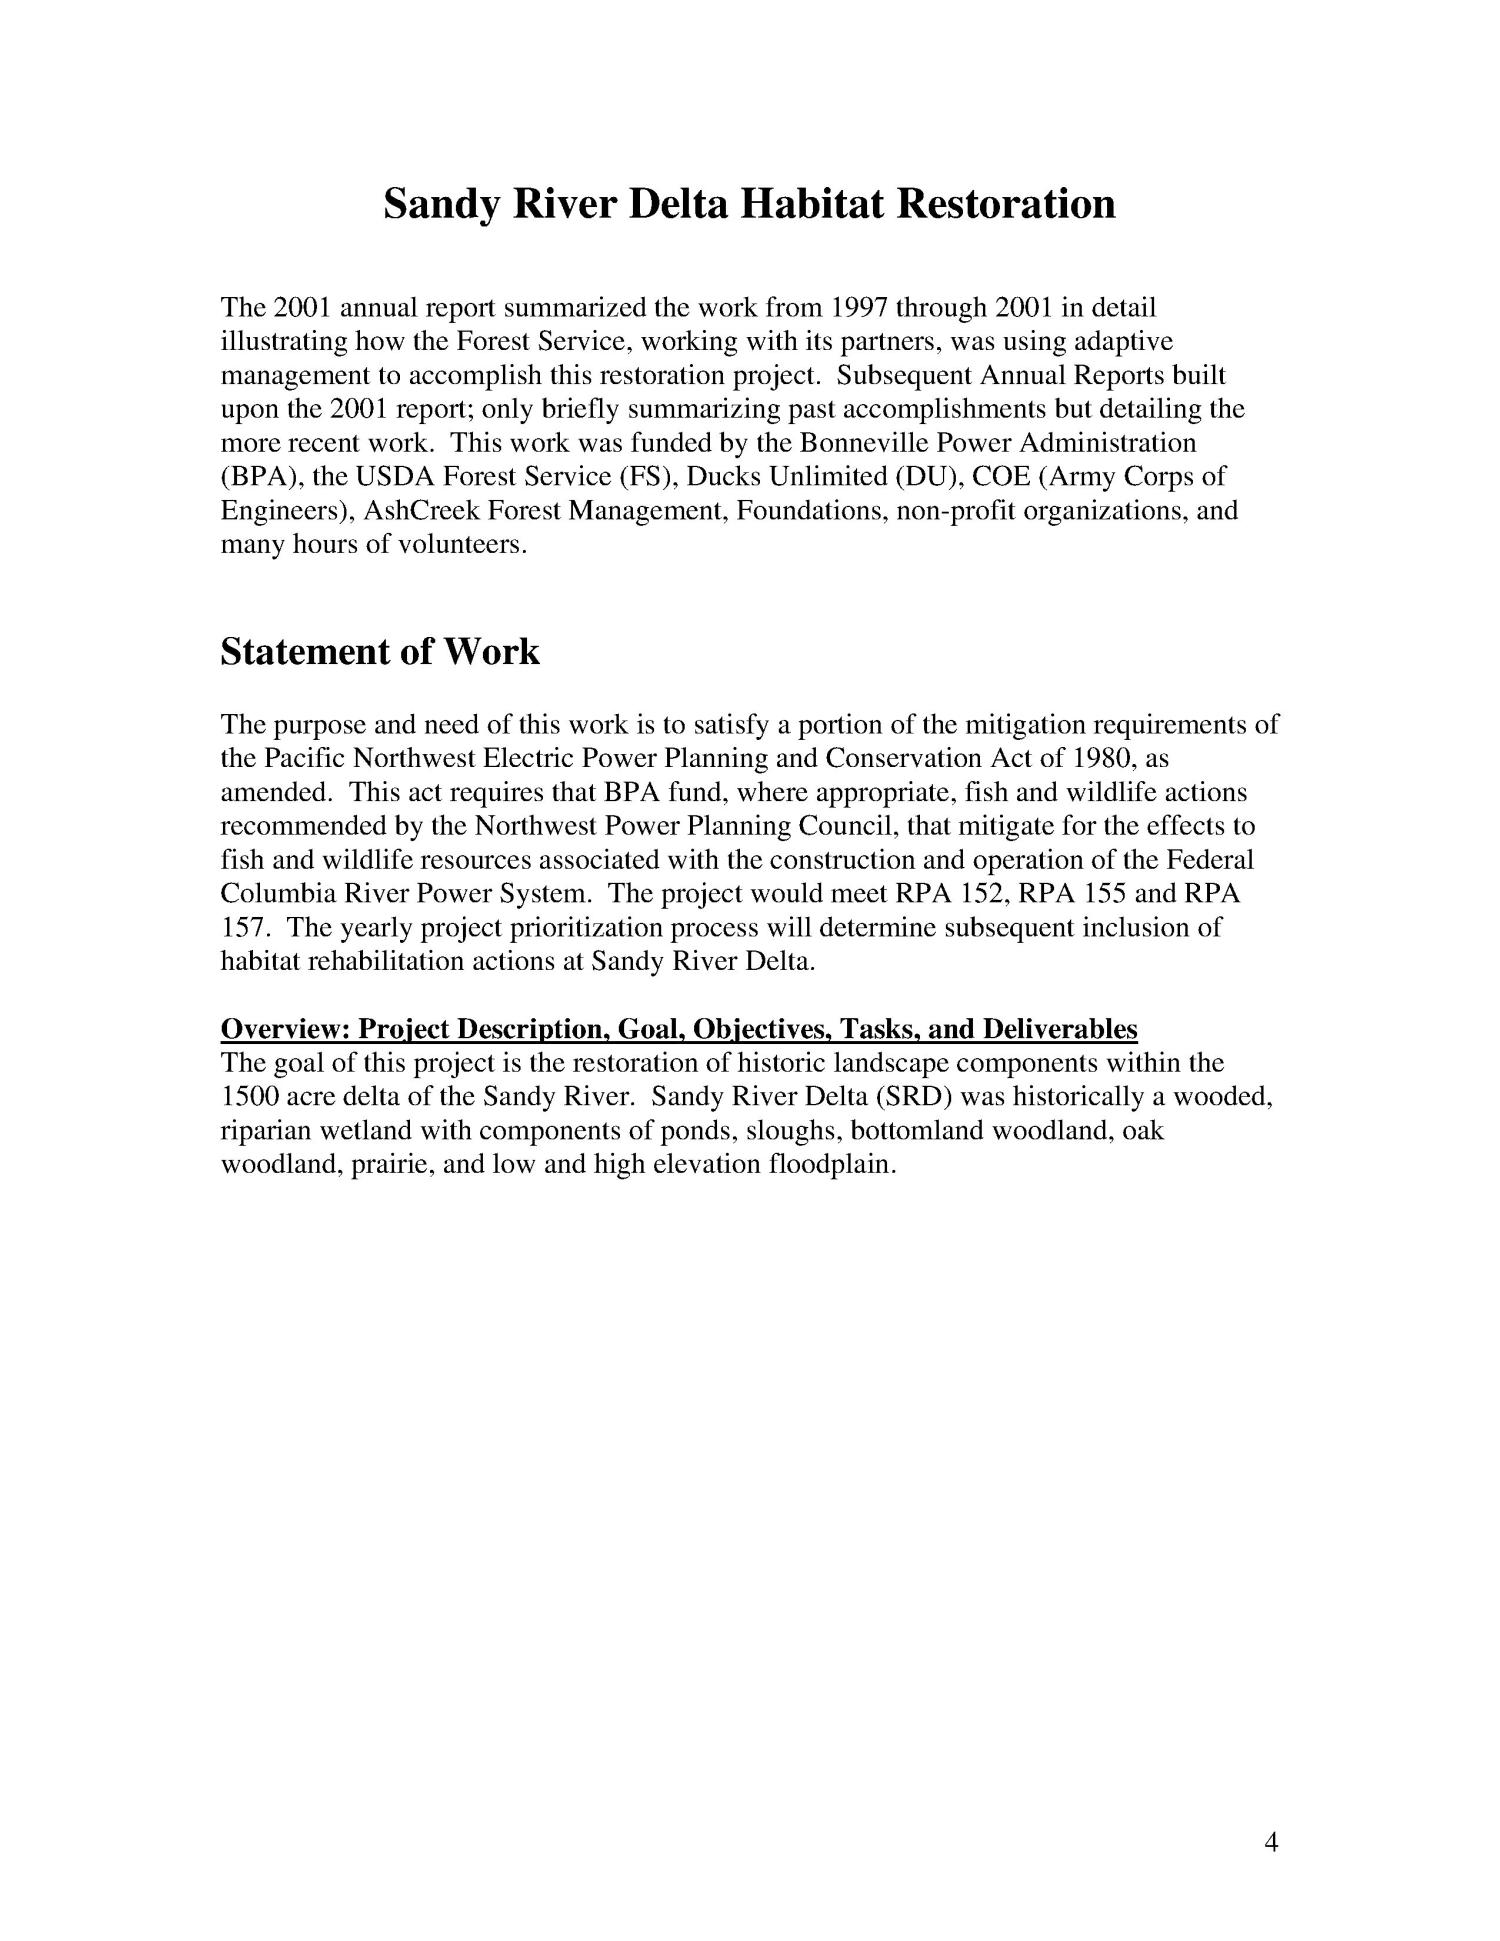 Sandy River Delta Habitat Restoration : Annual Report, January 2008 - March 2009.
                                                
                                                    [Sequence #]: 4 of 23
                                                